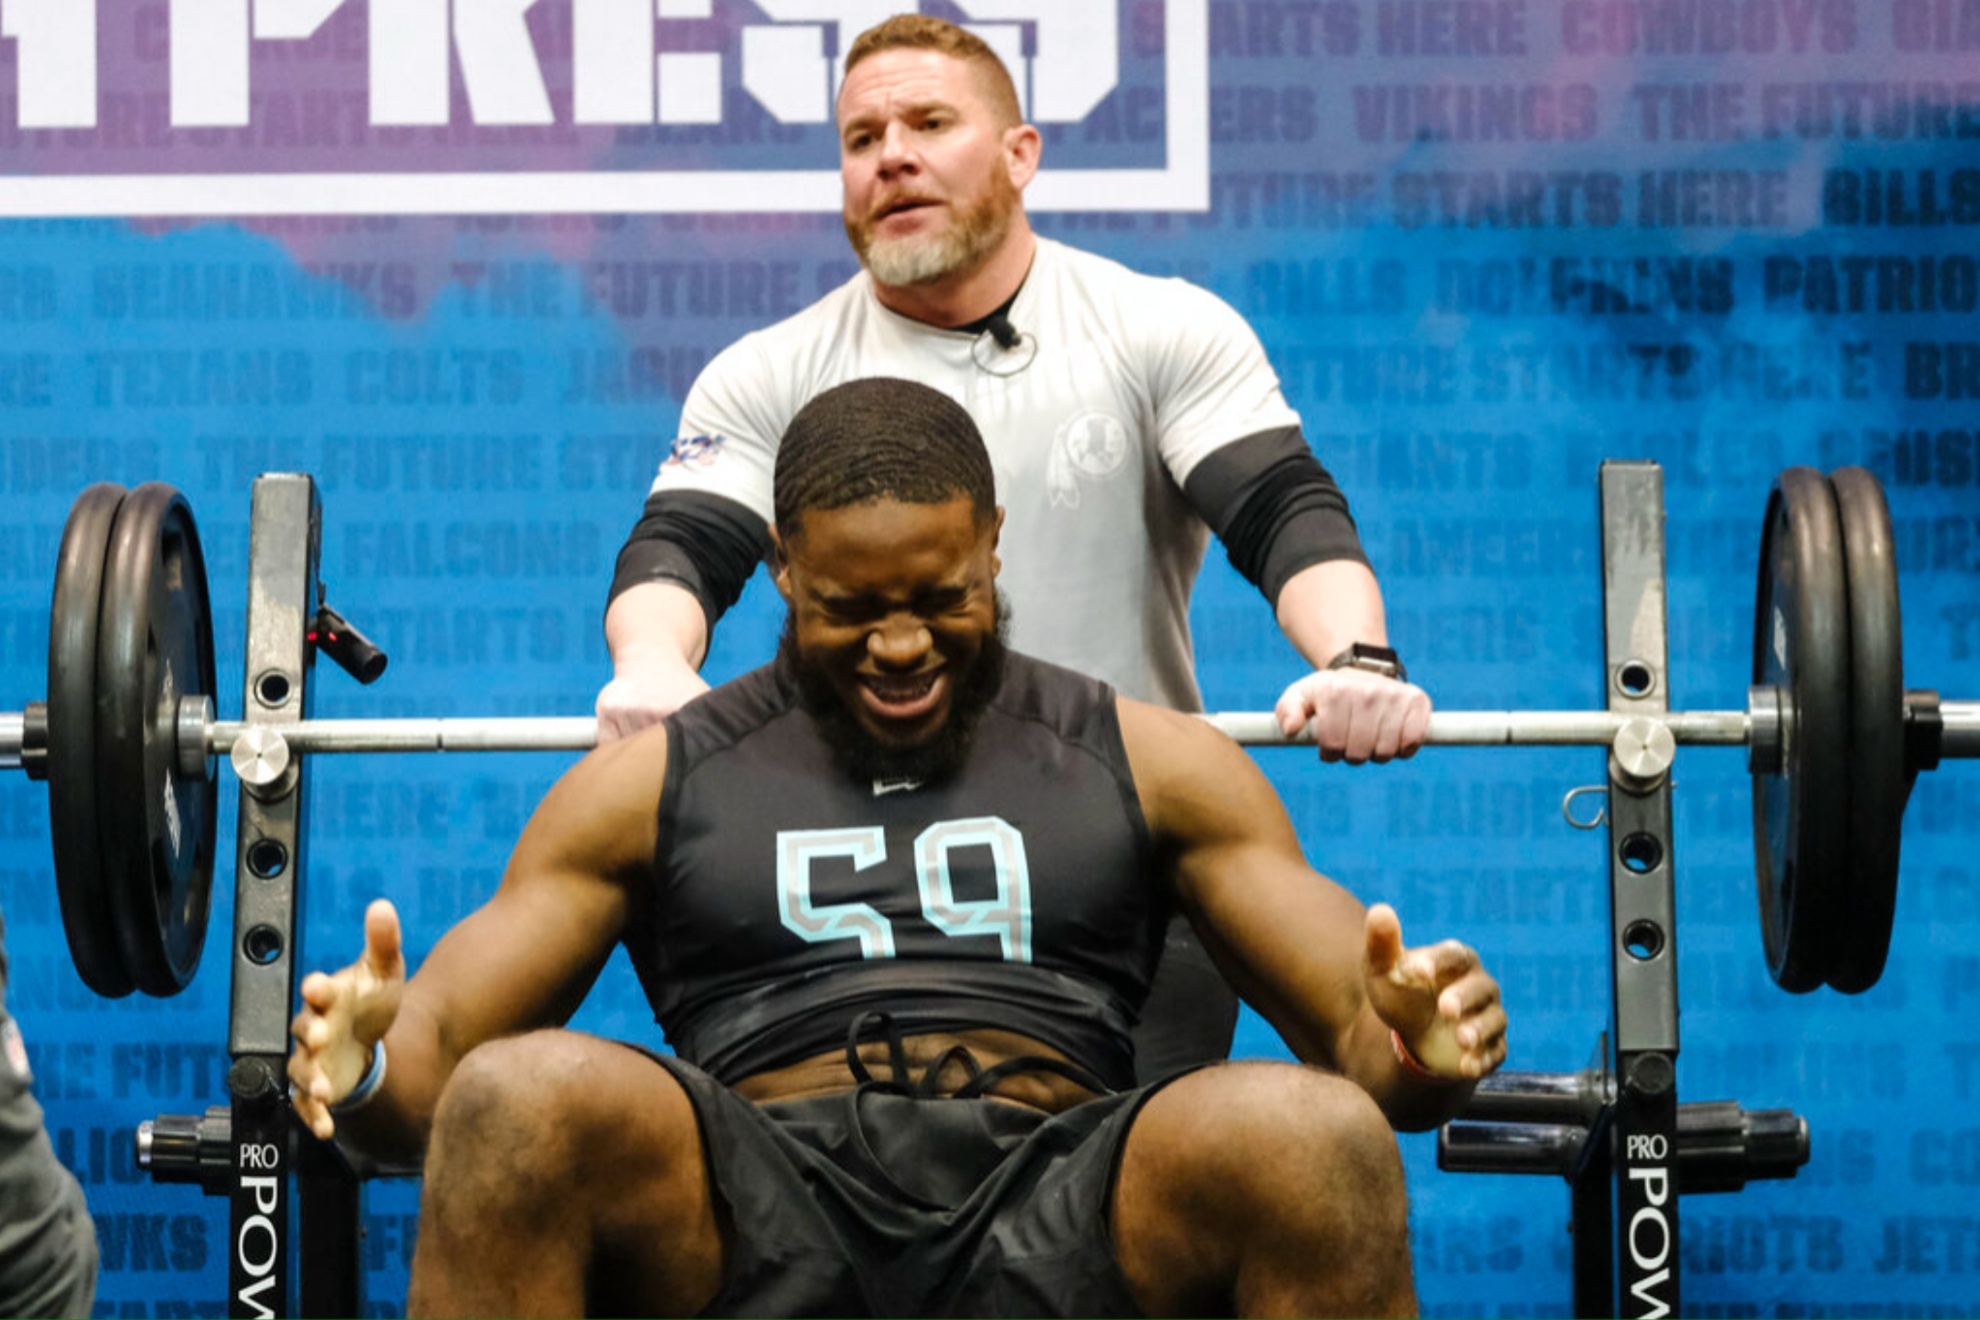 The bench press is a staple test in the NFL Scouting Combine